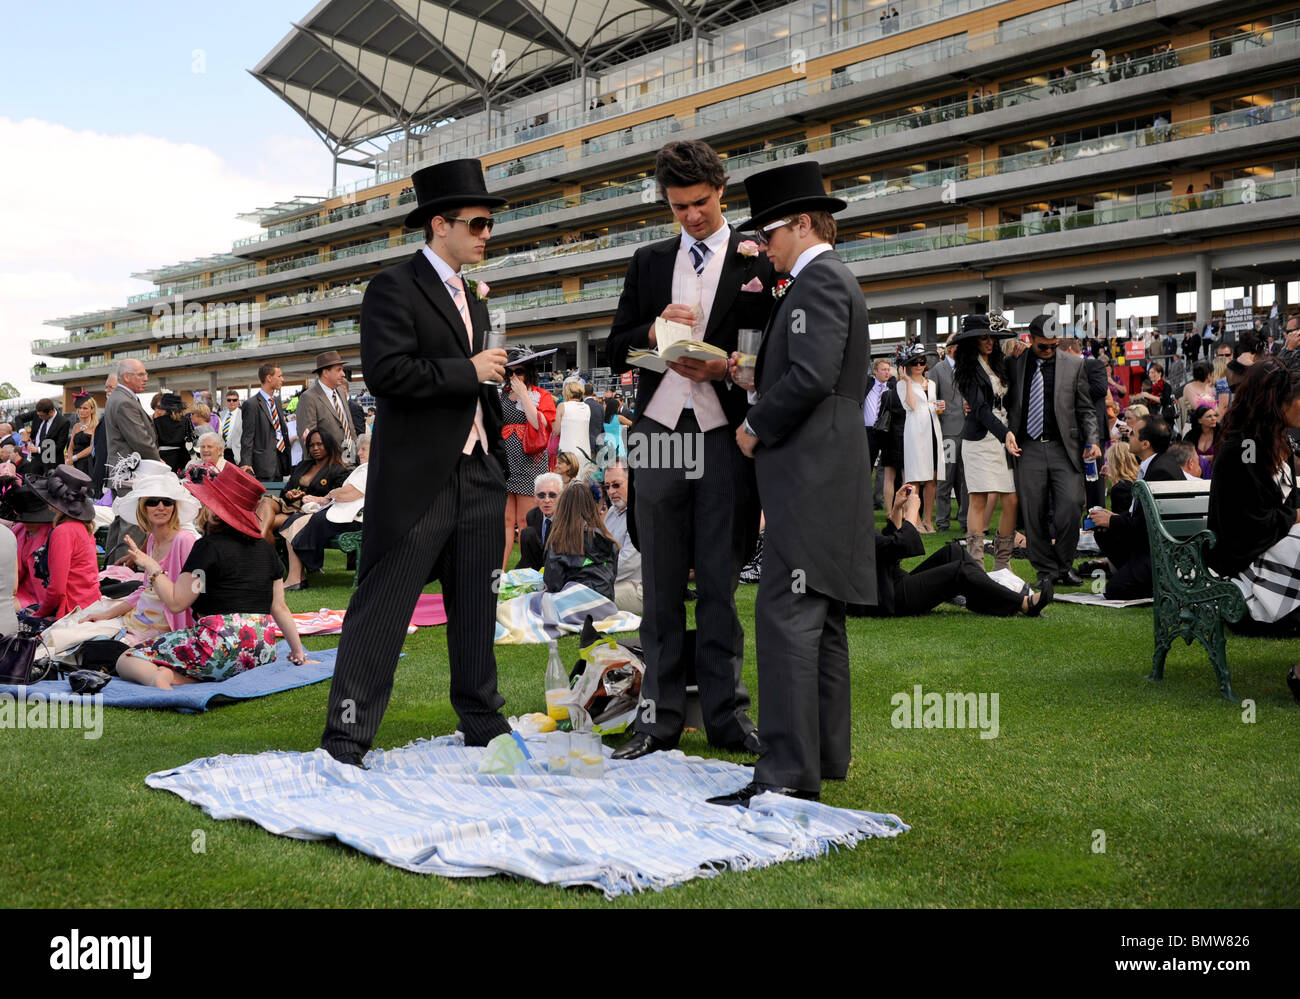 Royal Ascot Horse Racing male Racegoers wearing Morning Suits in front of the Grandstand Berkshire UK Stock Photo